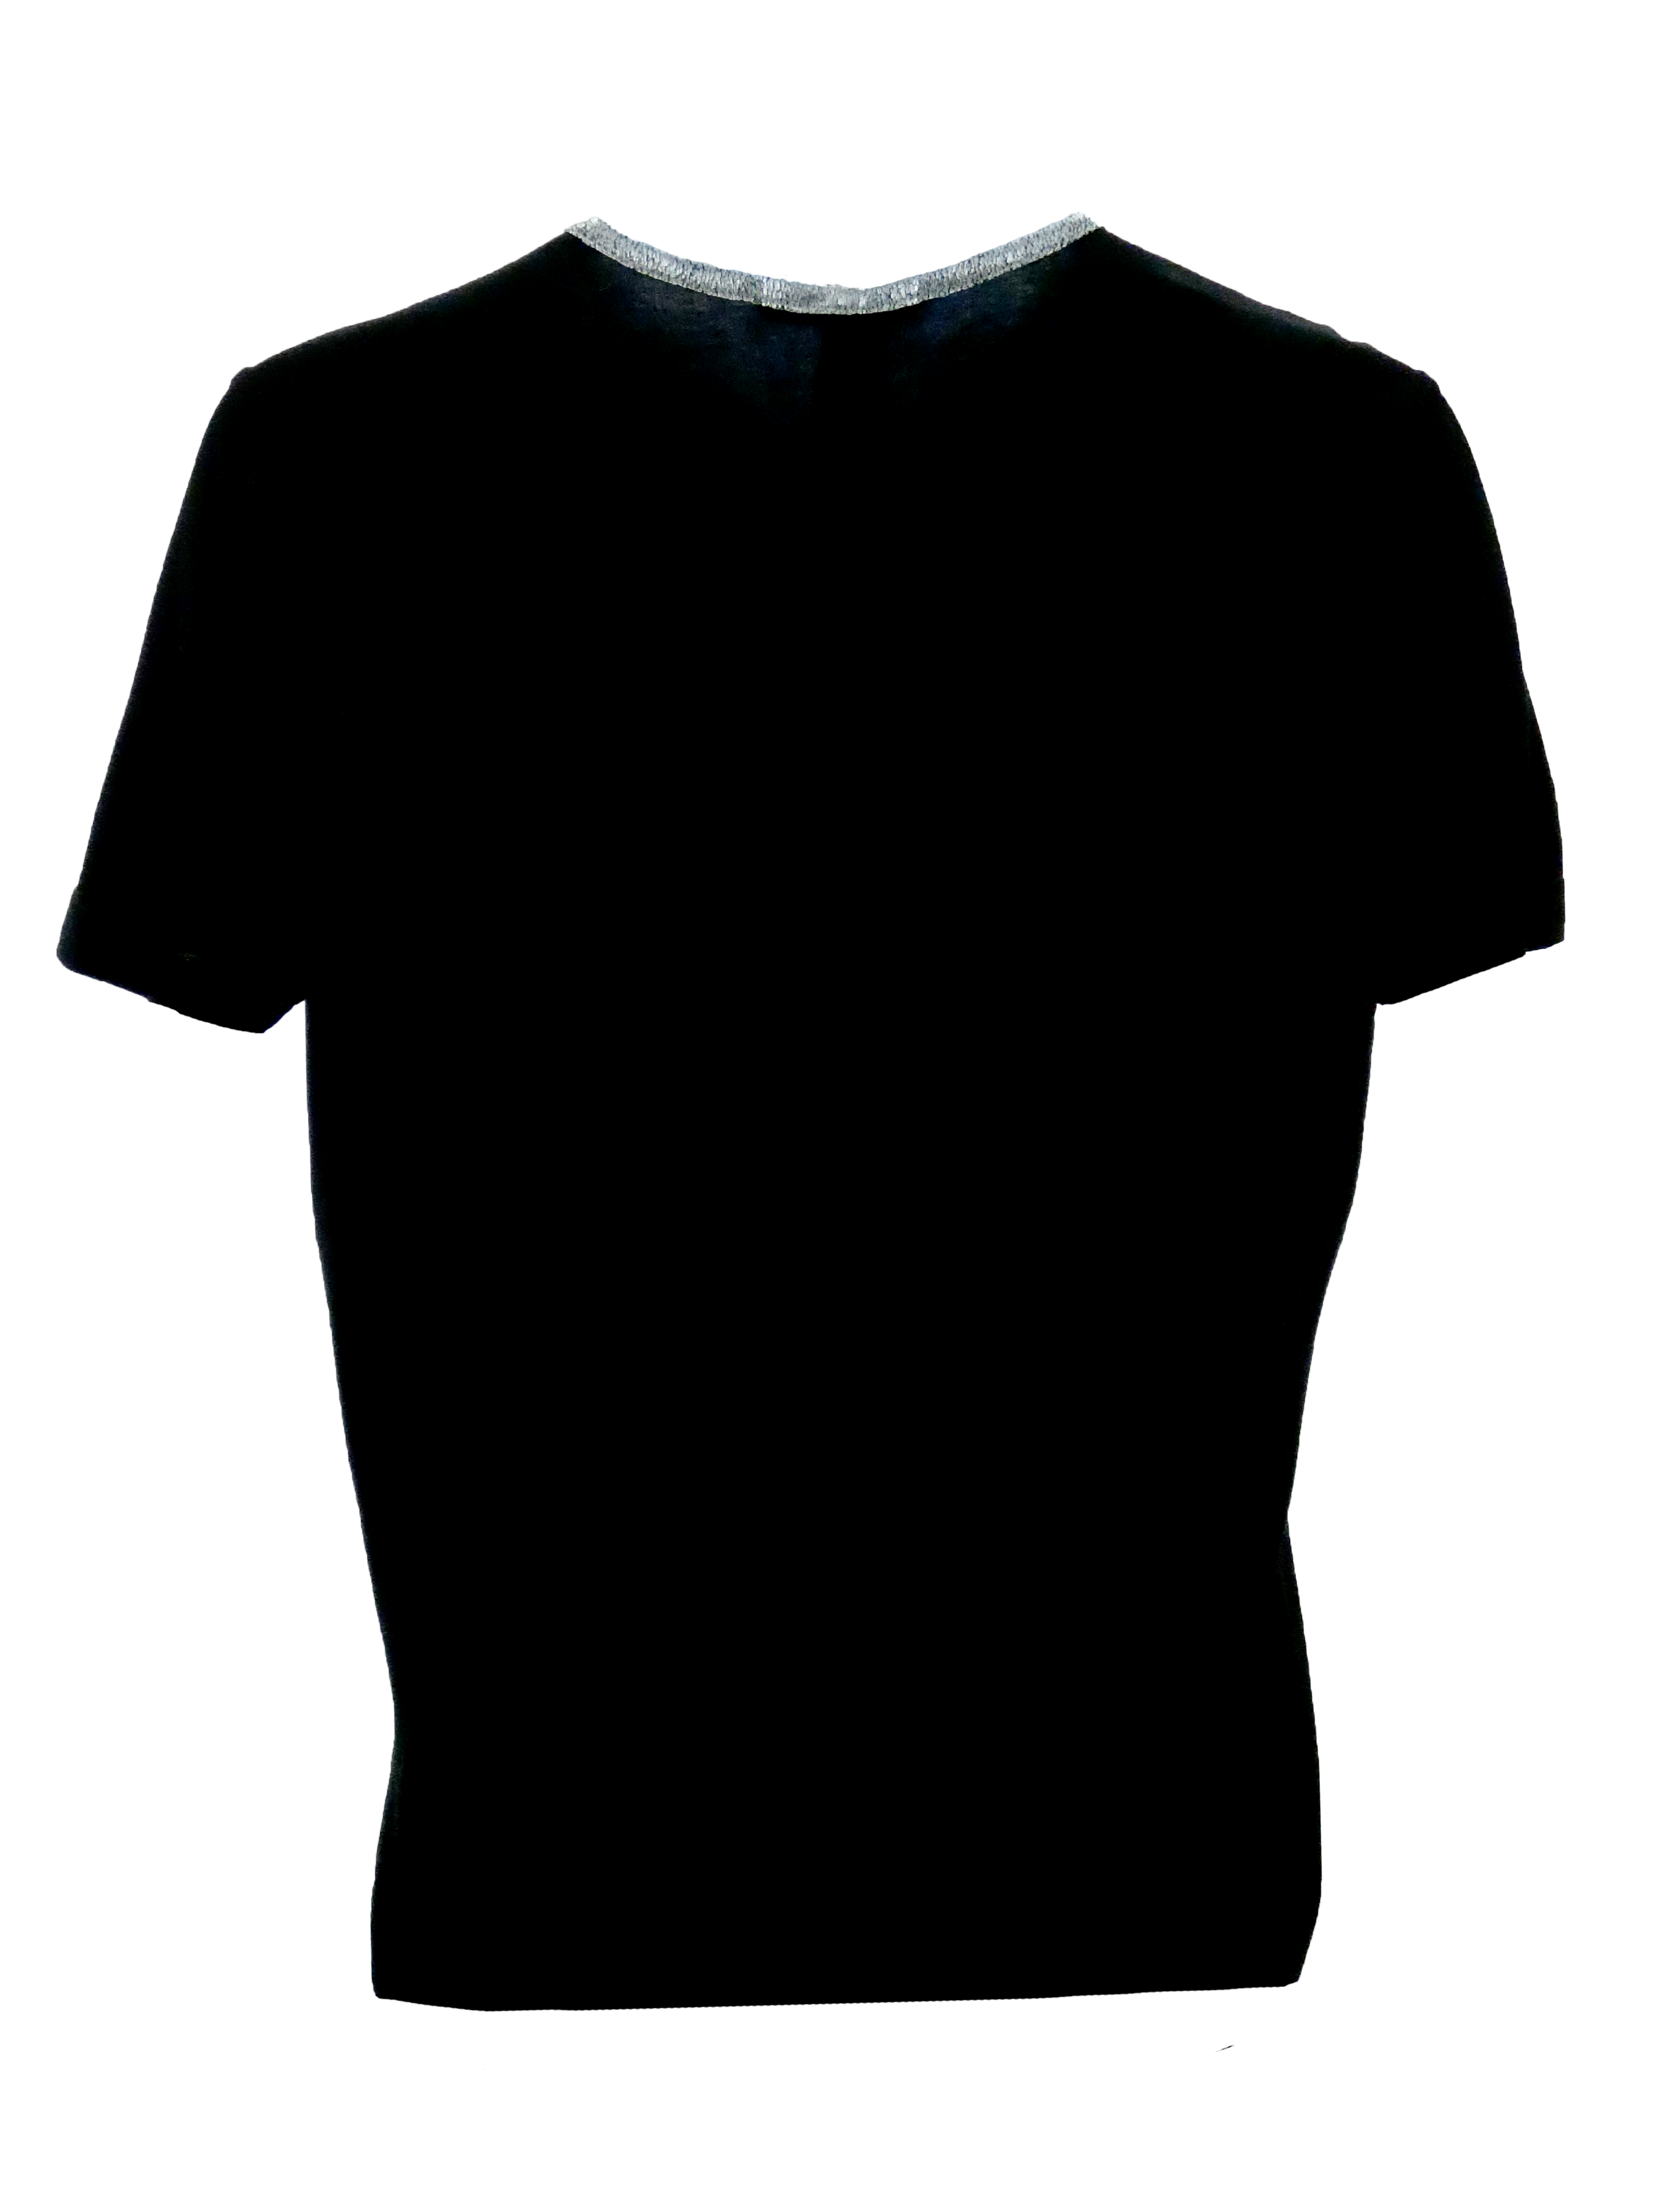 BLACK CREW NECK T-SHIRT WITH SILVER CONTRAST NECK RIB